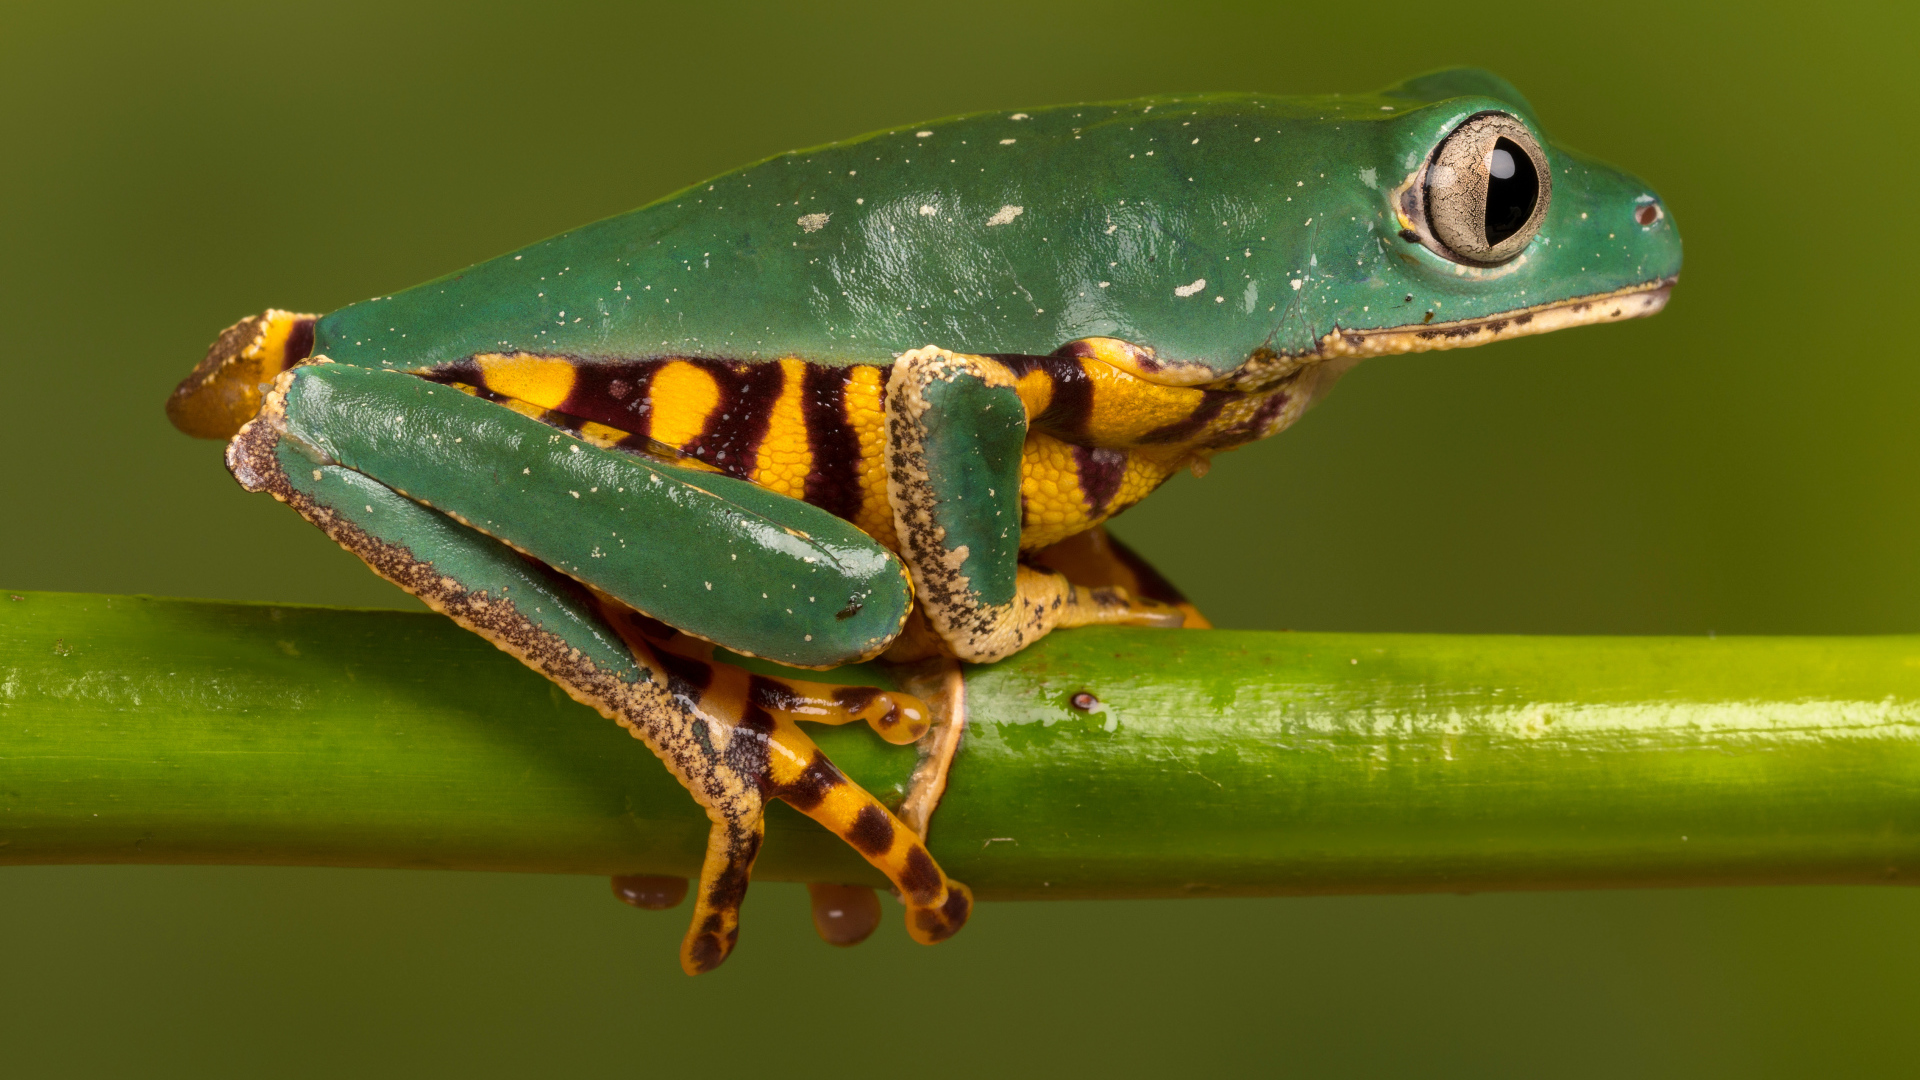 A green frog with a yellow belly sits on a green branch